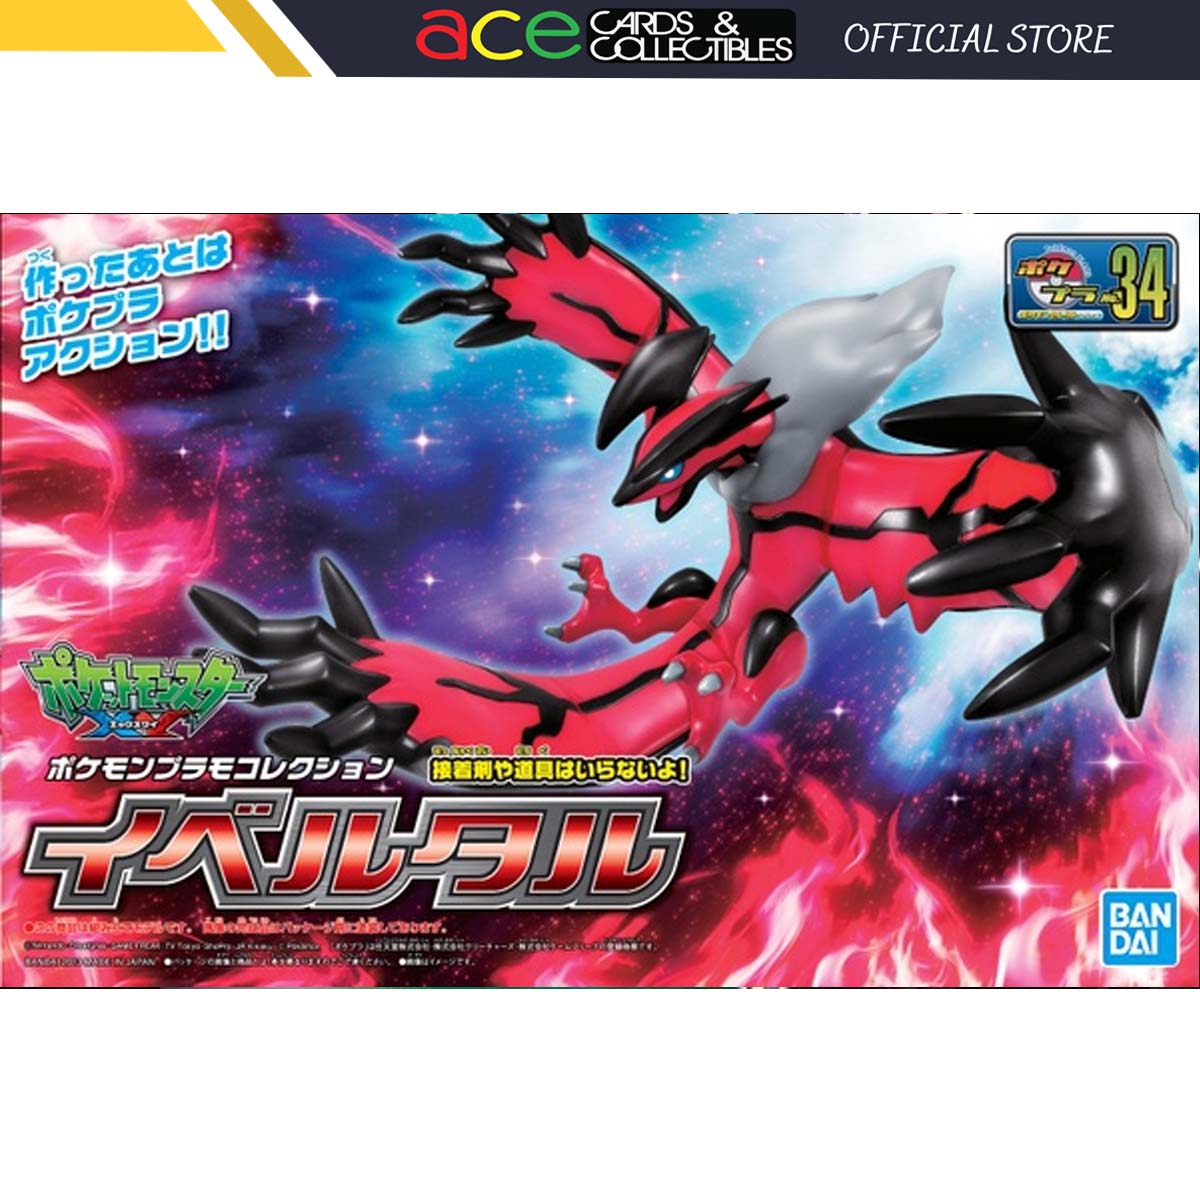 Pokemon Plastic Model Collection 34 "Yveltal"-Bandai-Ace Cards & Collectibles